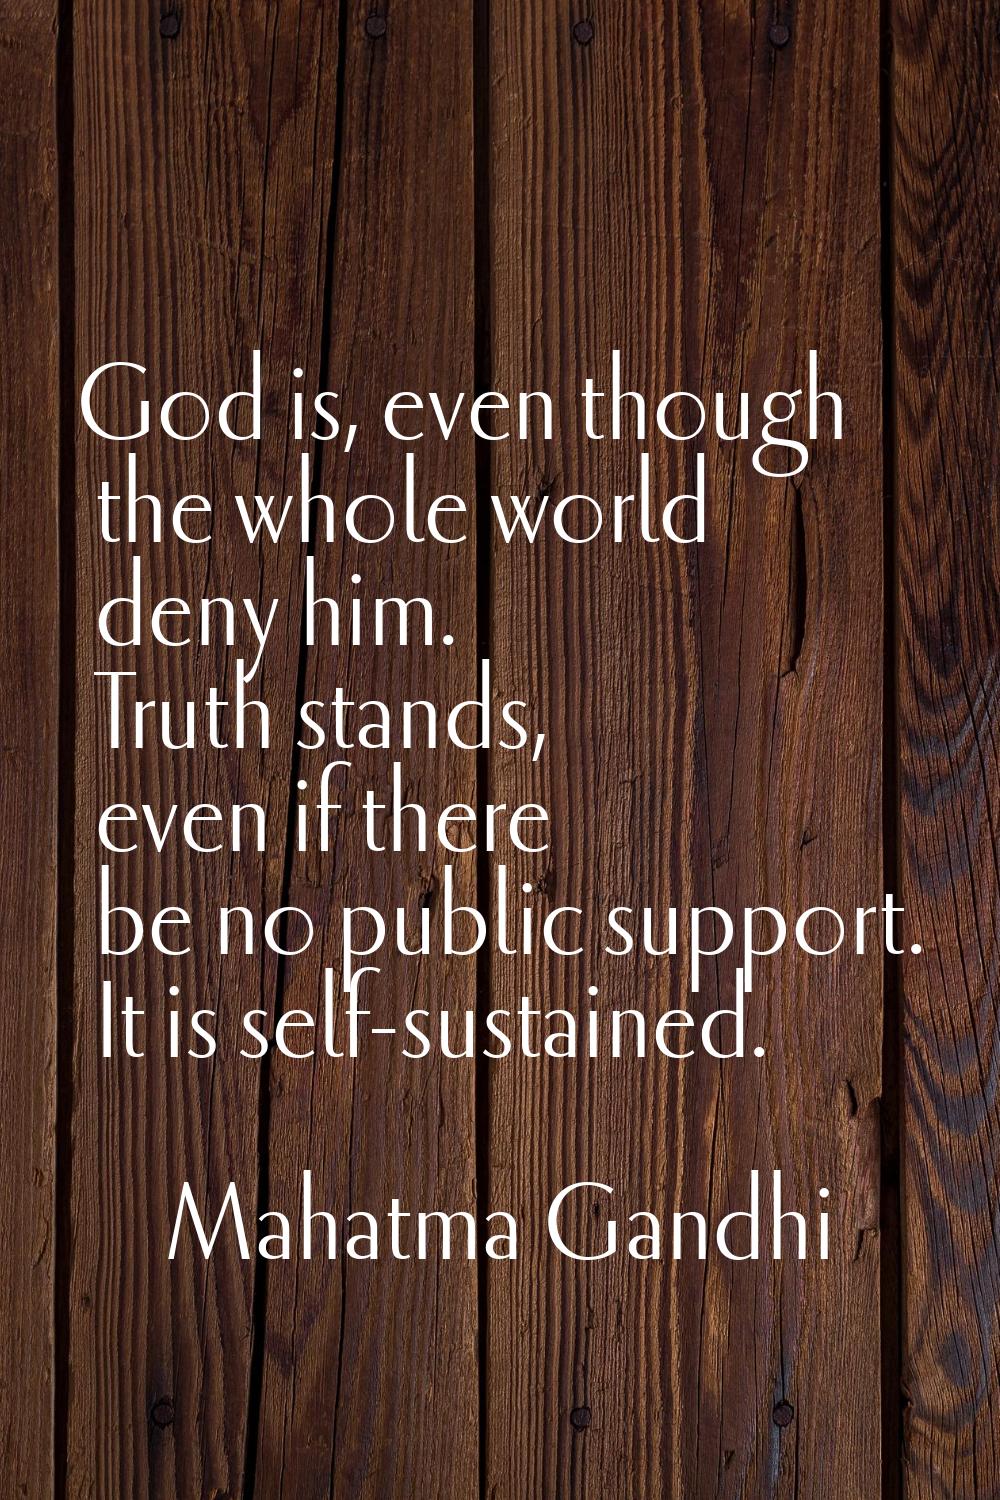 God is, even though the whole world deny him. Truth stands, even if there be no public support. It 